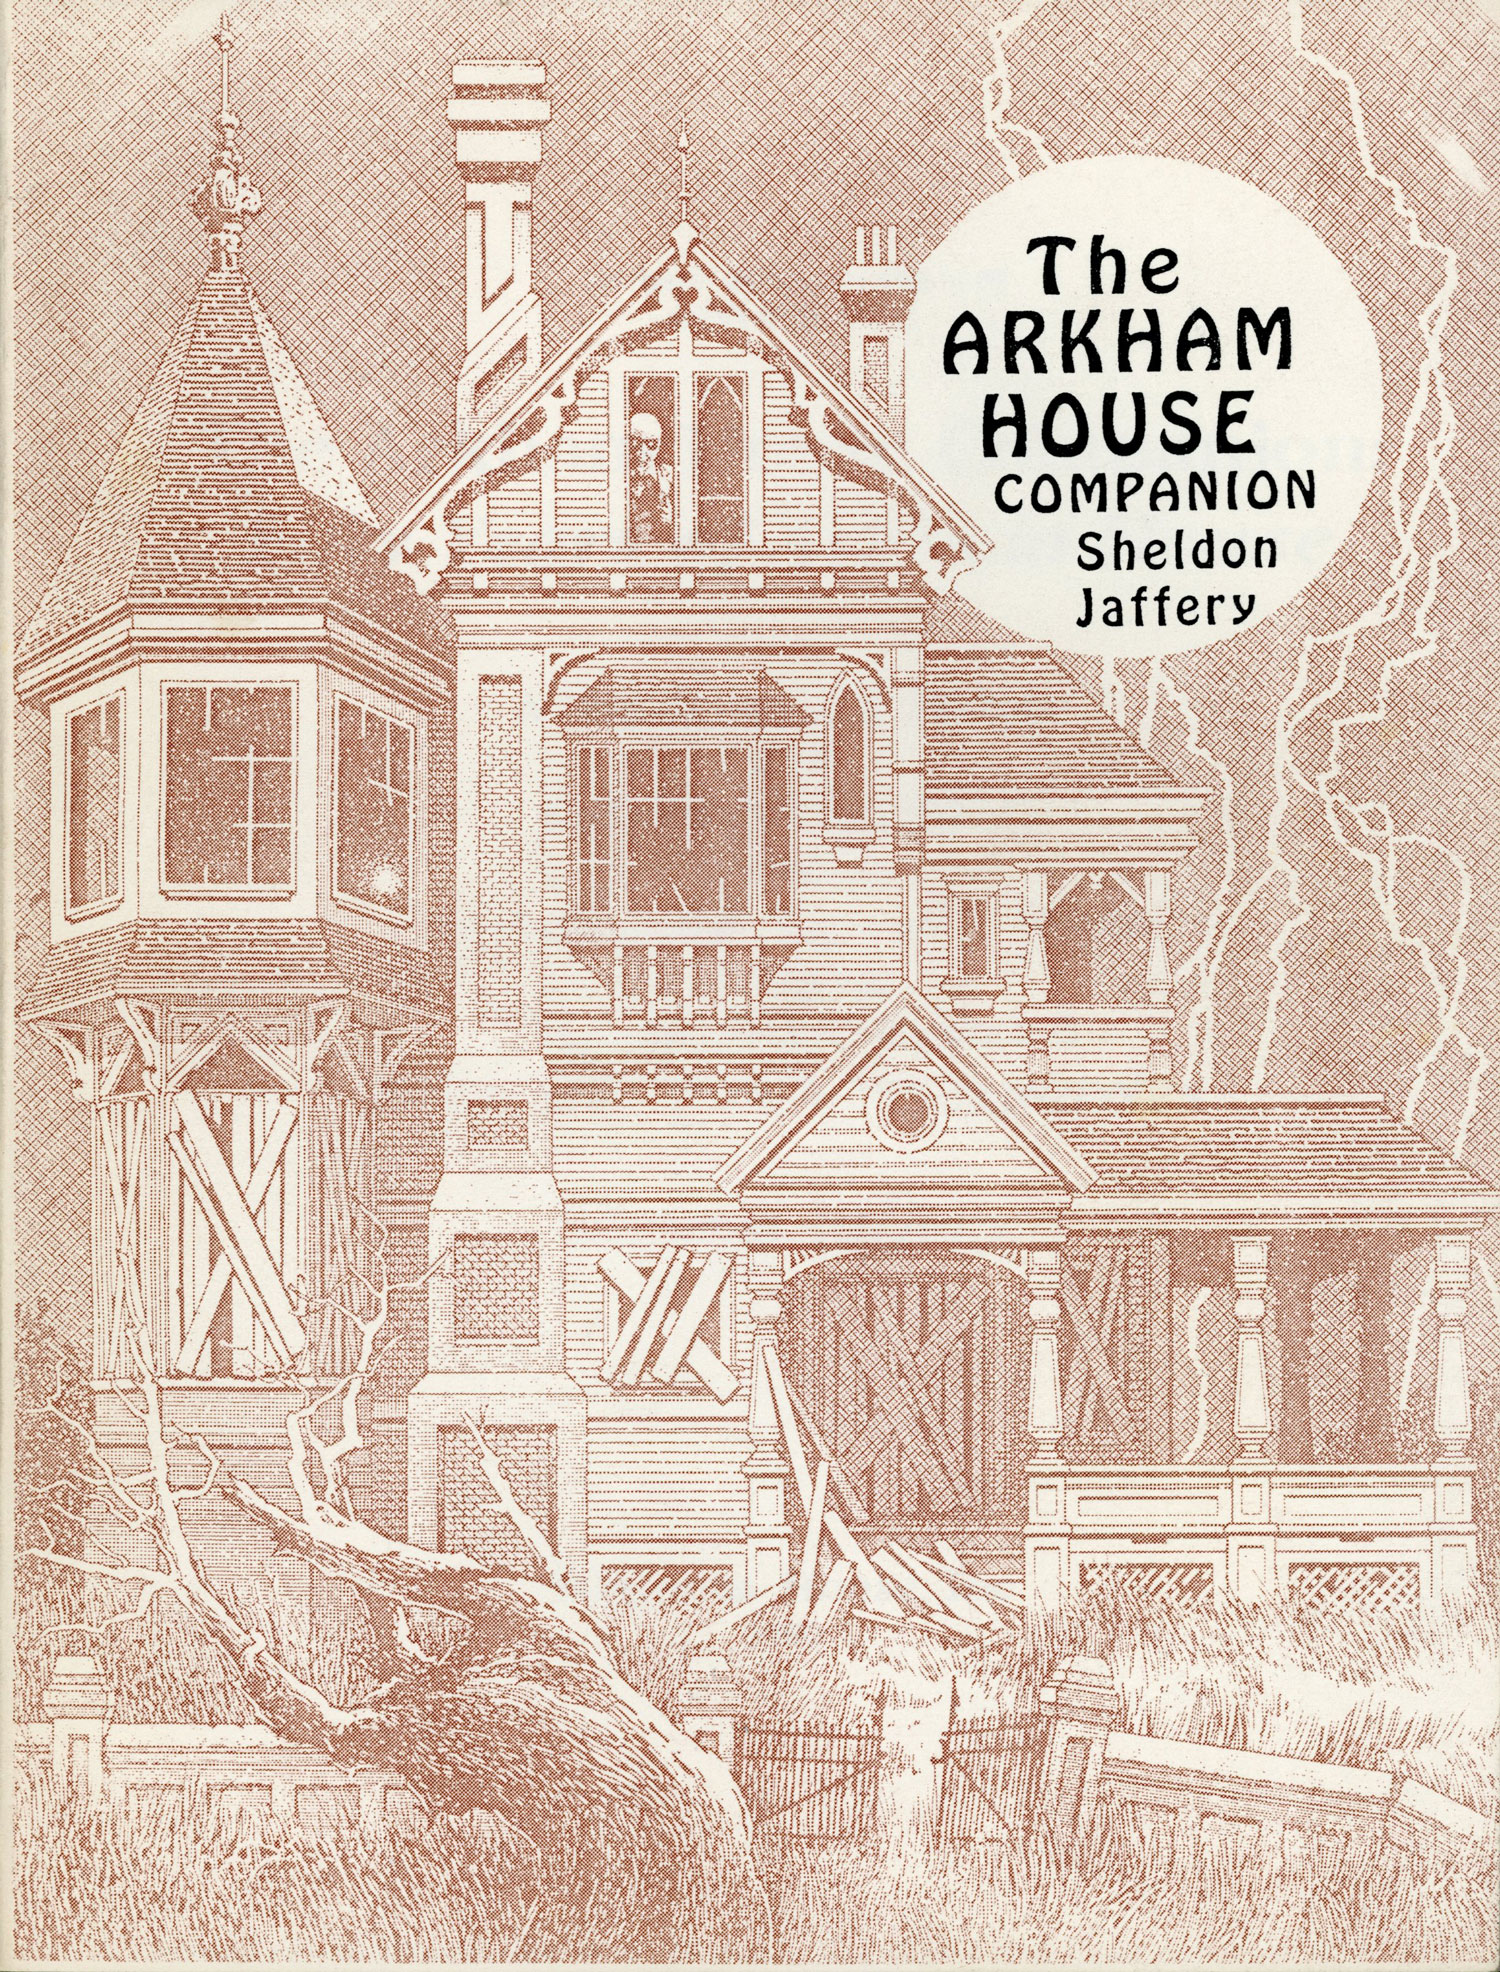 THE ARKHAM HOUSE COMPANION: FIFTY YEARS OF ARKHAM HOUSE. A BIBLIOGRAPHICAL HISTORY AND COLLECTOR'S PRICE GUIDE TO ARKHAM HOUSE / MYCROFT & MORAN INCLUDING THE REVISED AND EXPANDED HORRORS AND UNPLEASANTRIES - Jaffery, Sheldon R[onald]